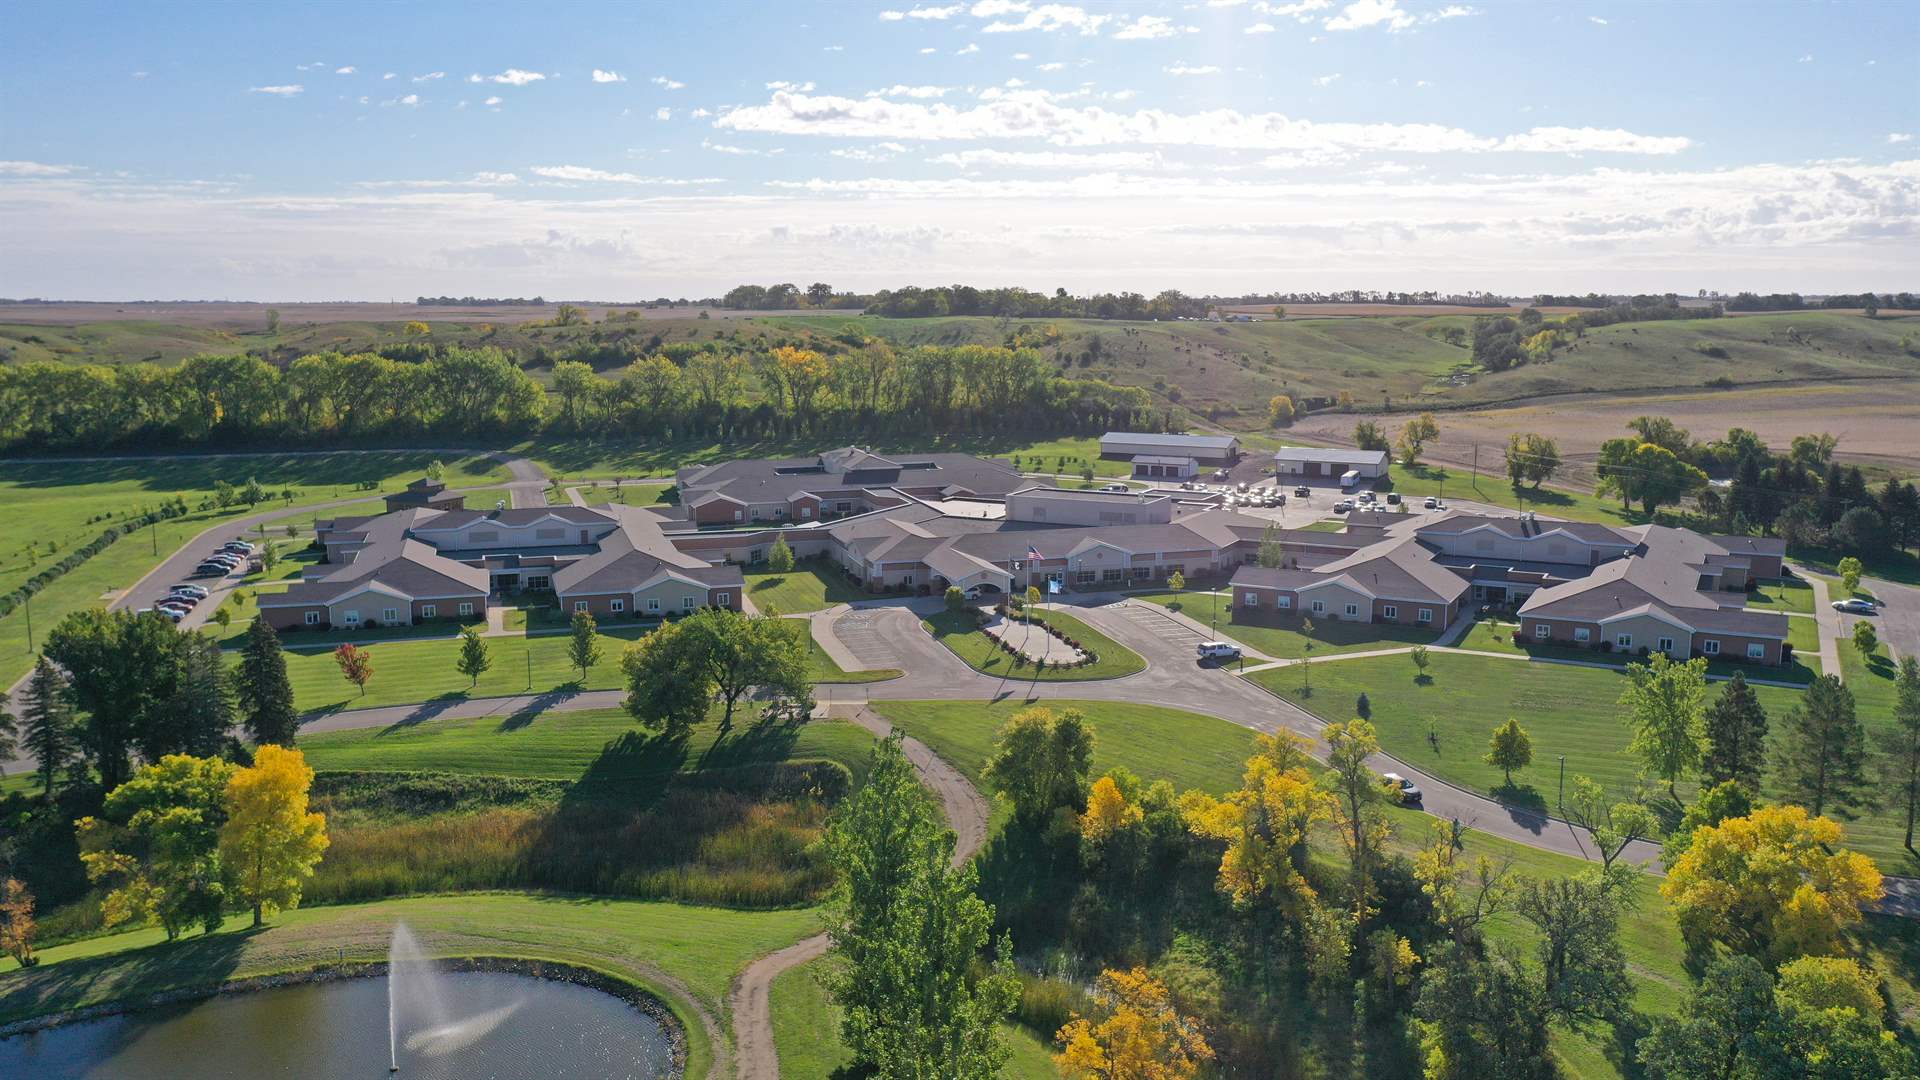 A drone picture taken of the North Dakota Veterans Home's campus.